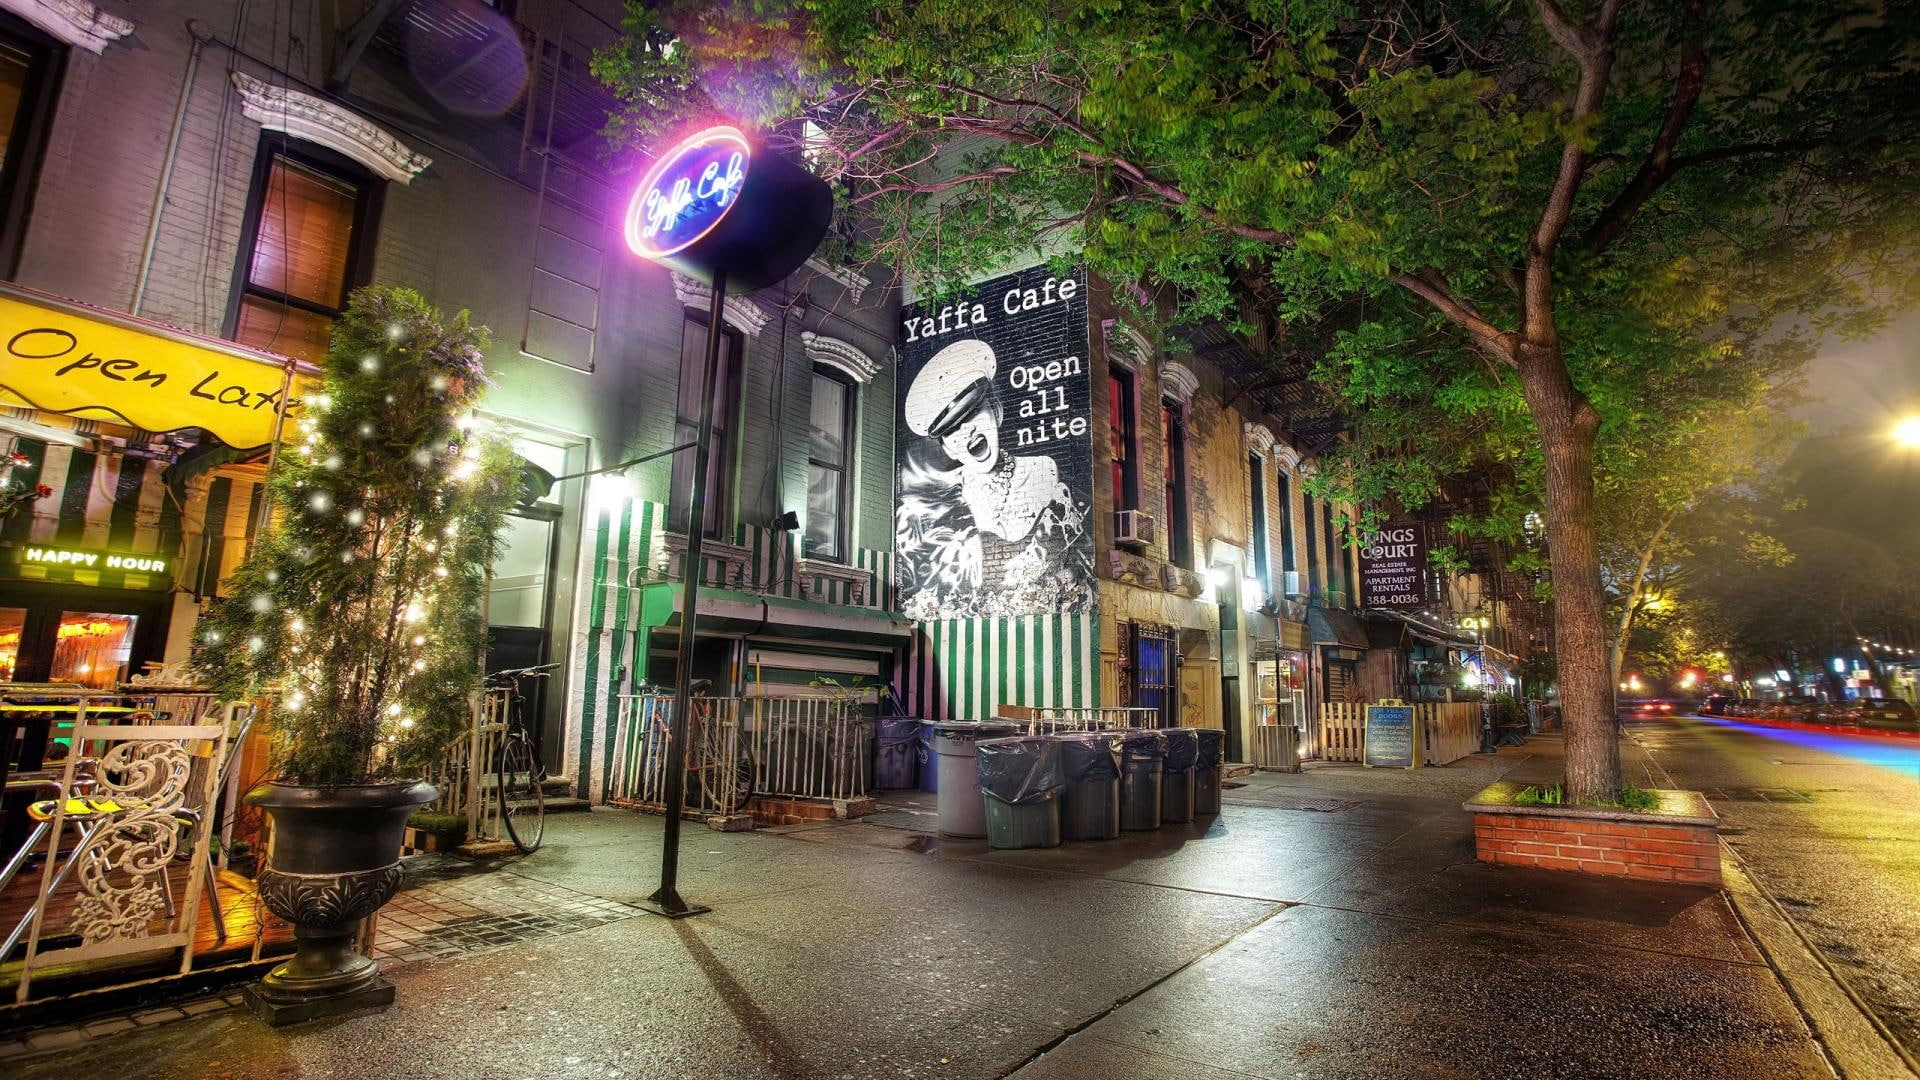 Yaffa Cafe In Greenwich Village Nyc, lights, street, night, nature and landscapes